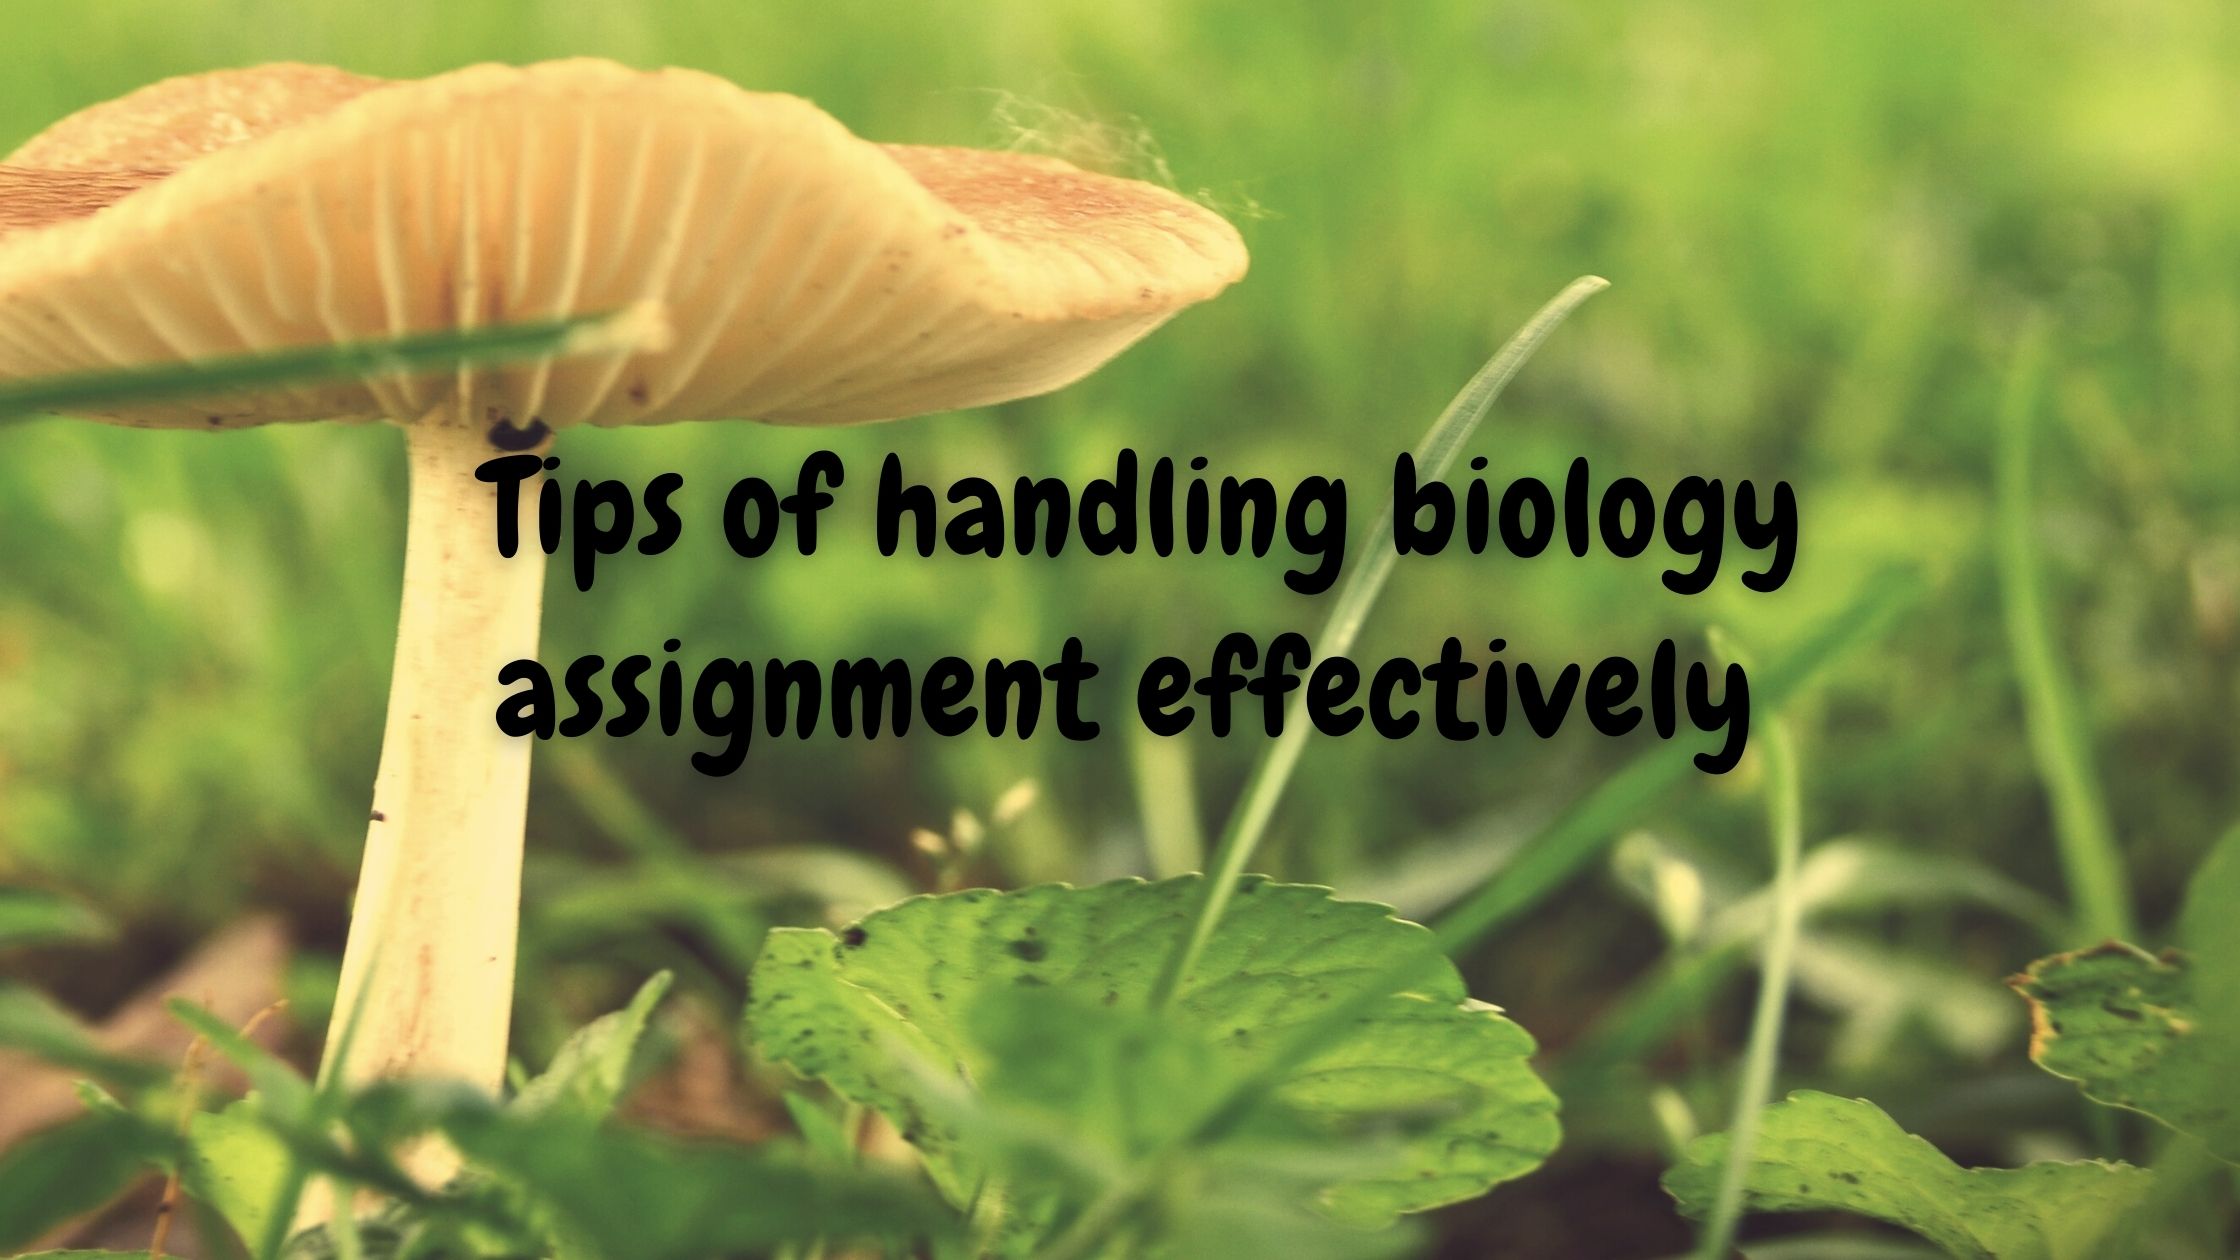 Tips of handling biology assignment effectively